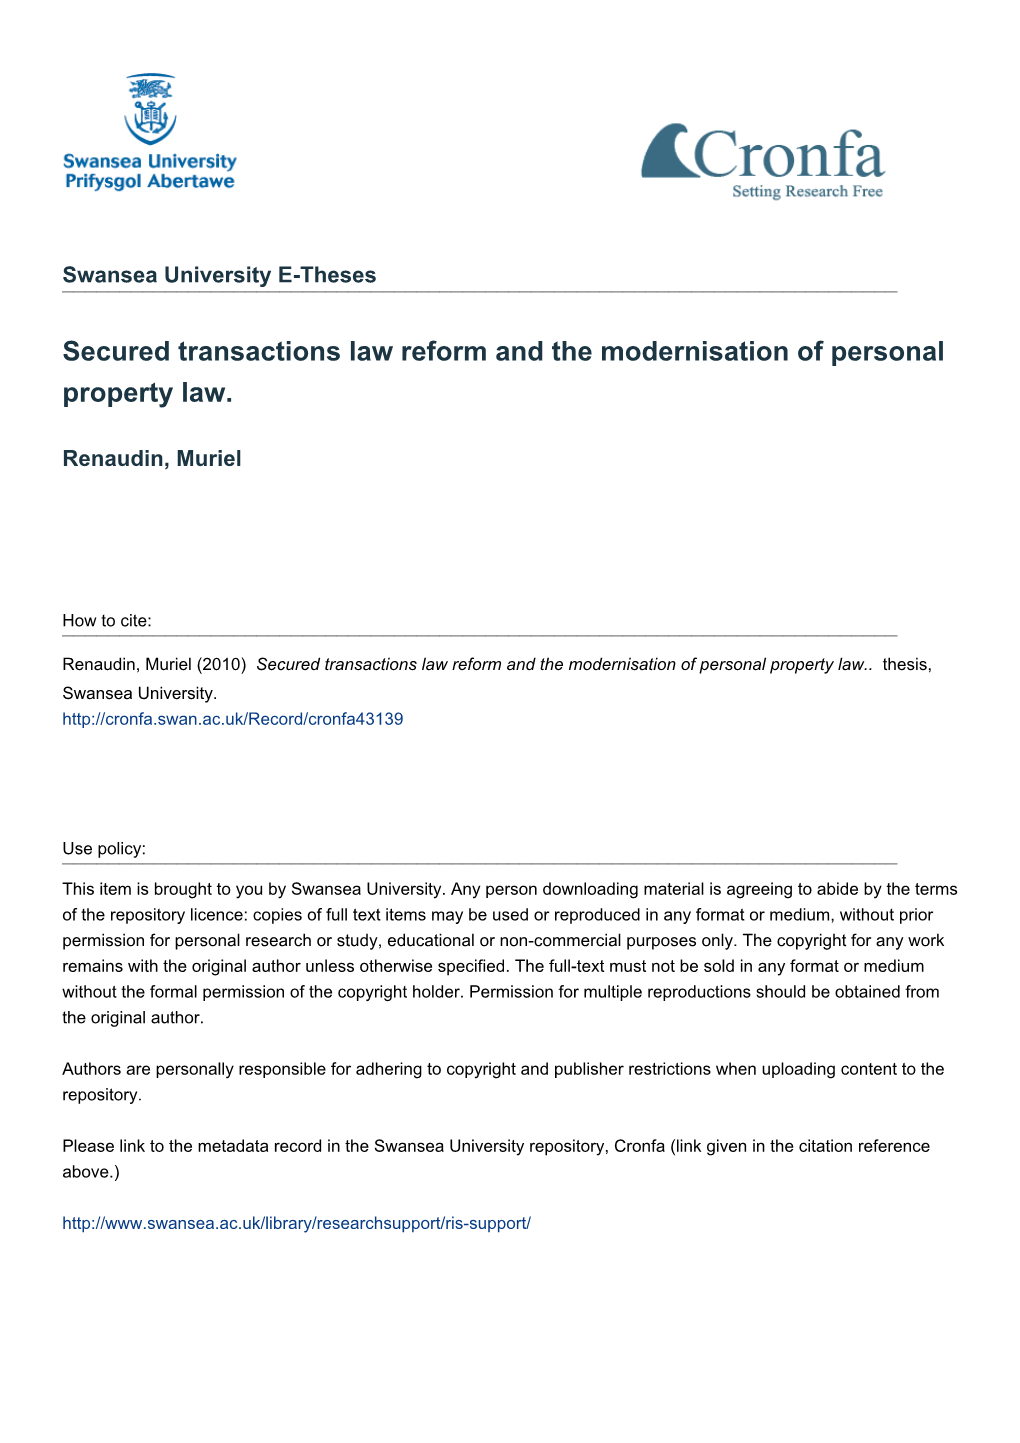 Secured Transactions Law Reform and the Modernisation of Personal Property Law